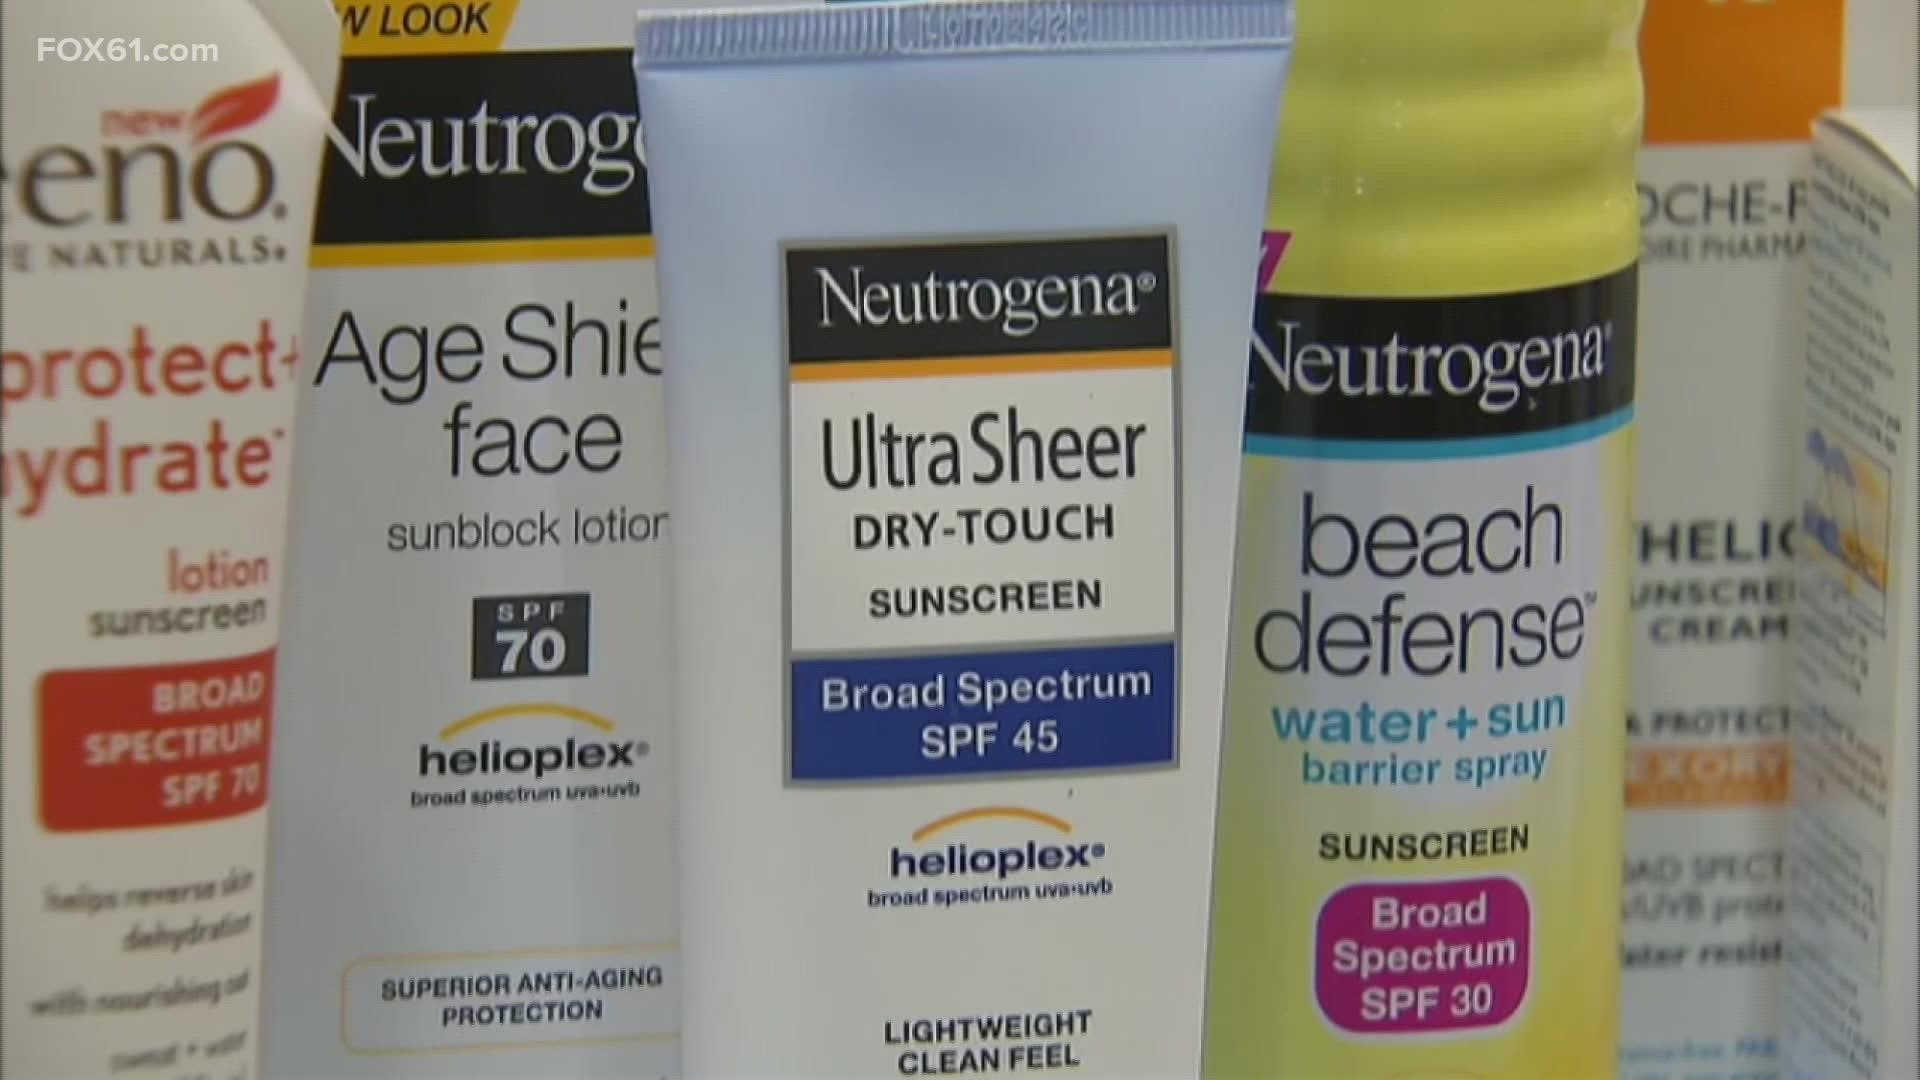 But the bottom line is that any sunscreen is better than none.